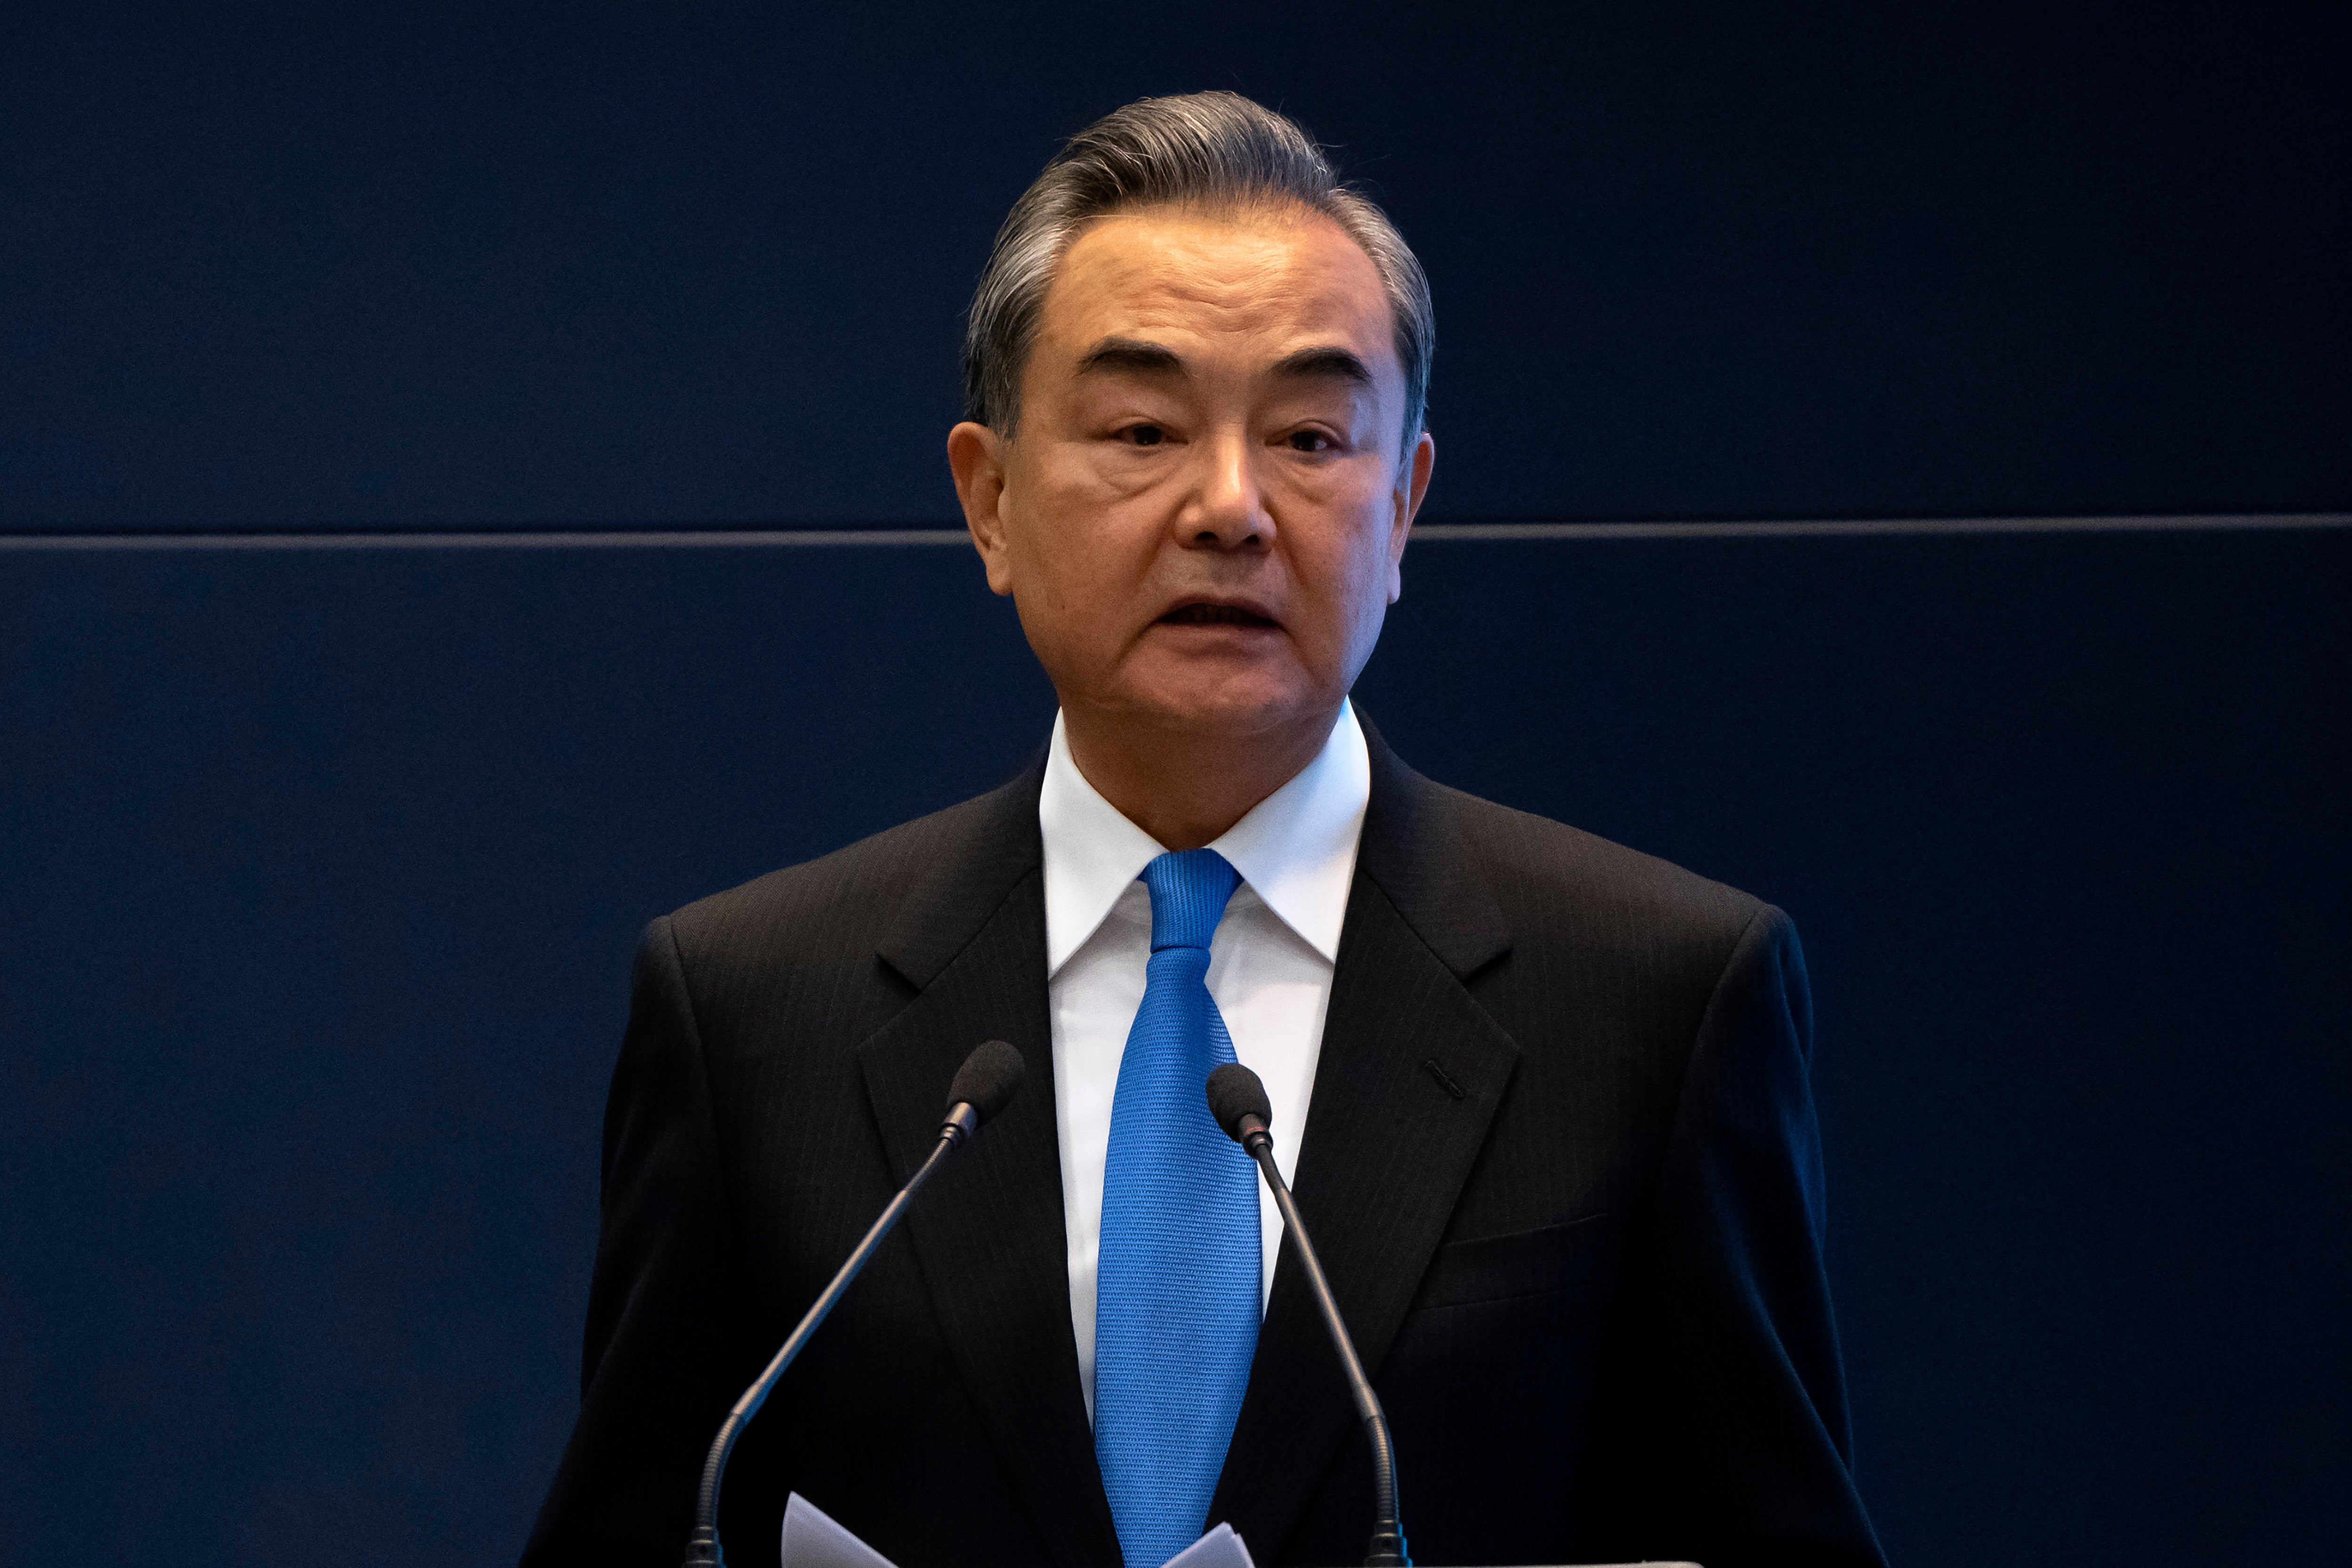 China’s foreign minister Wang Yi has criticised the US and other countries for their stance on Taiwan